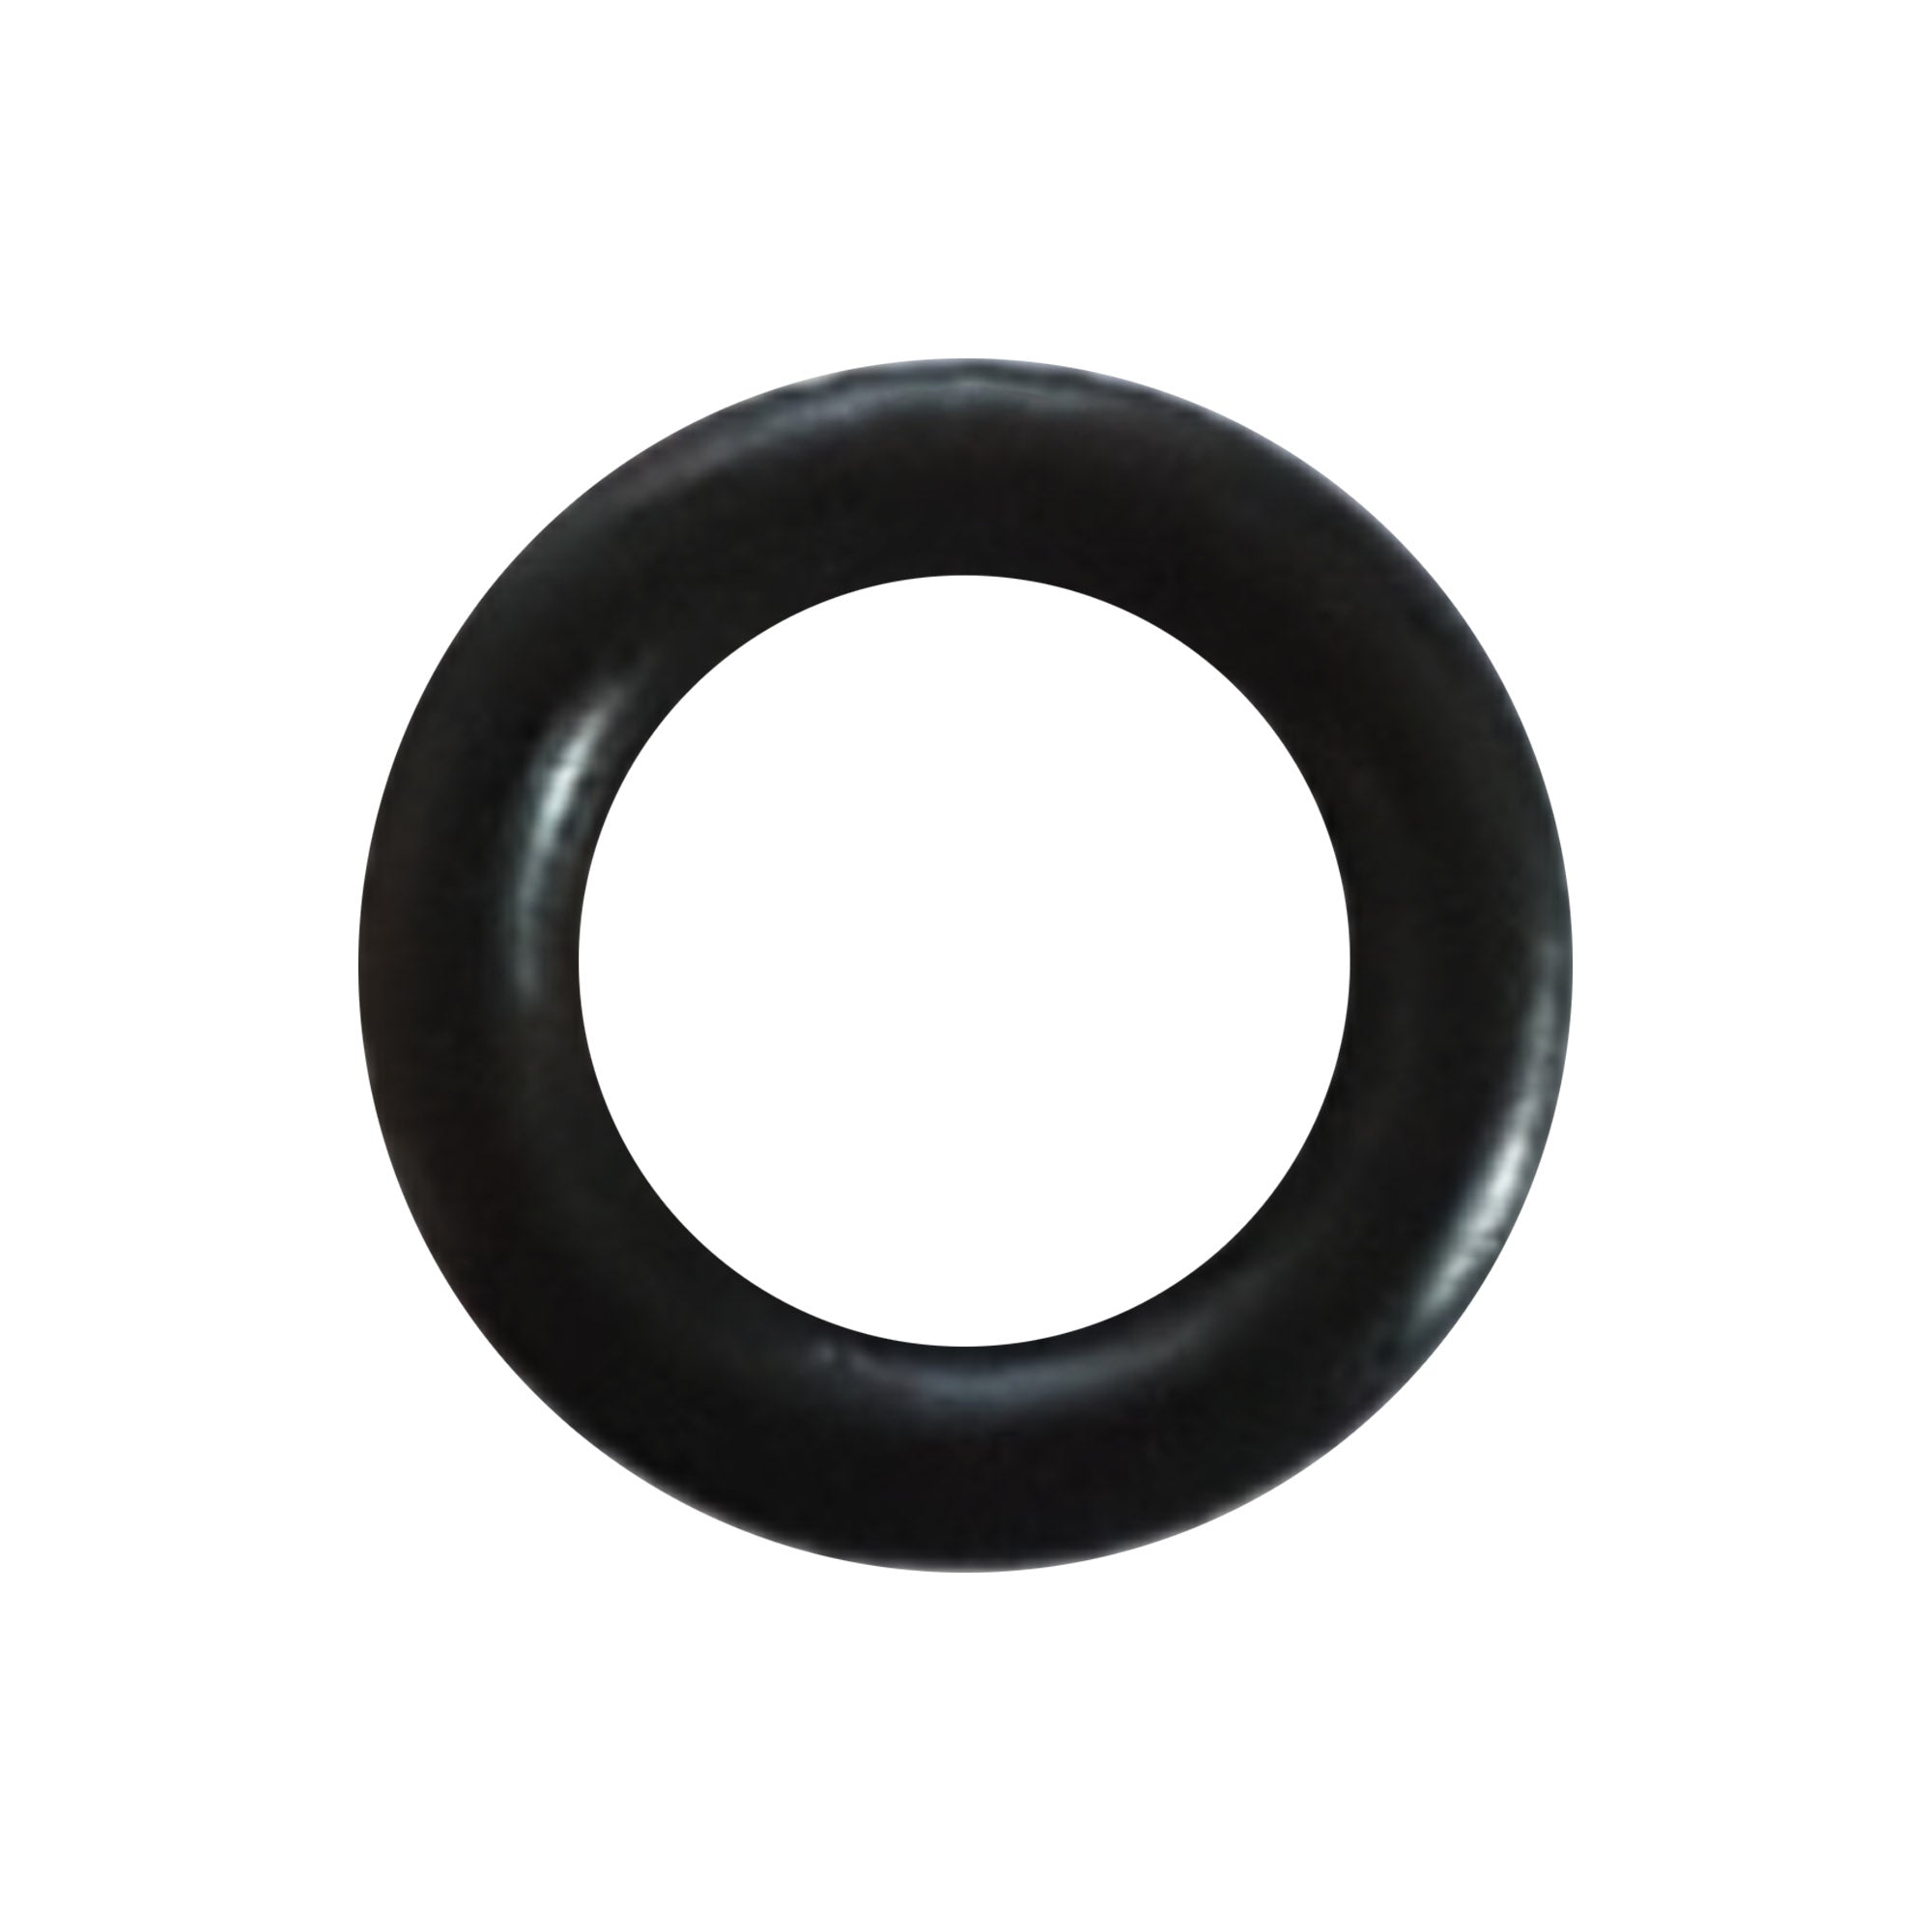 256467 - O-Ring, Pack of 6 - PURspray